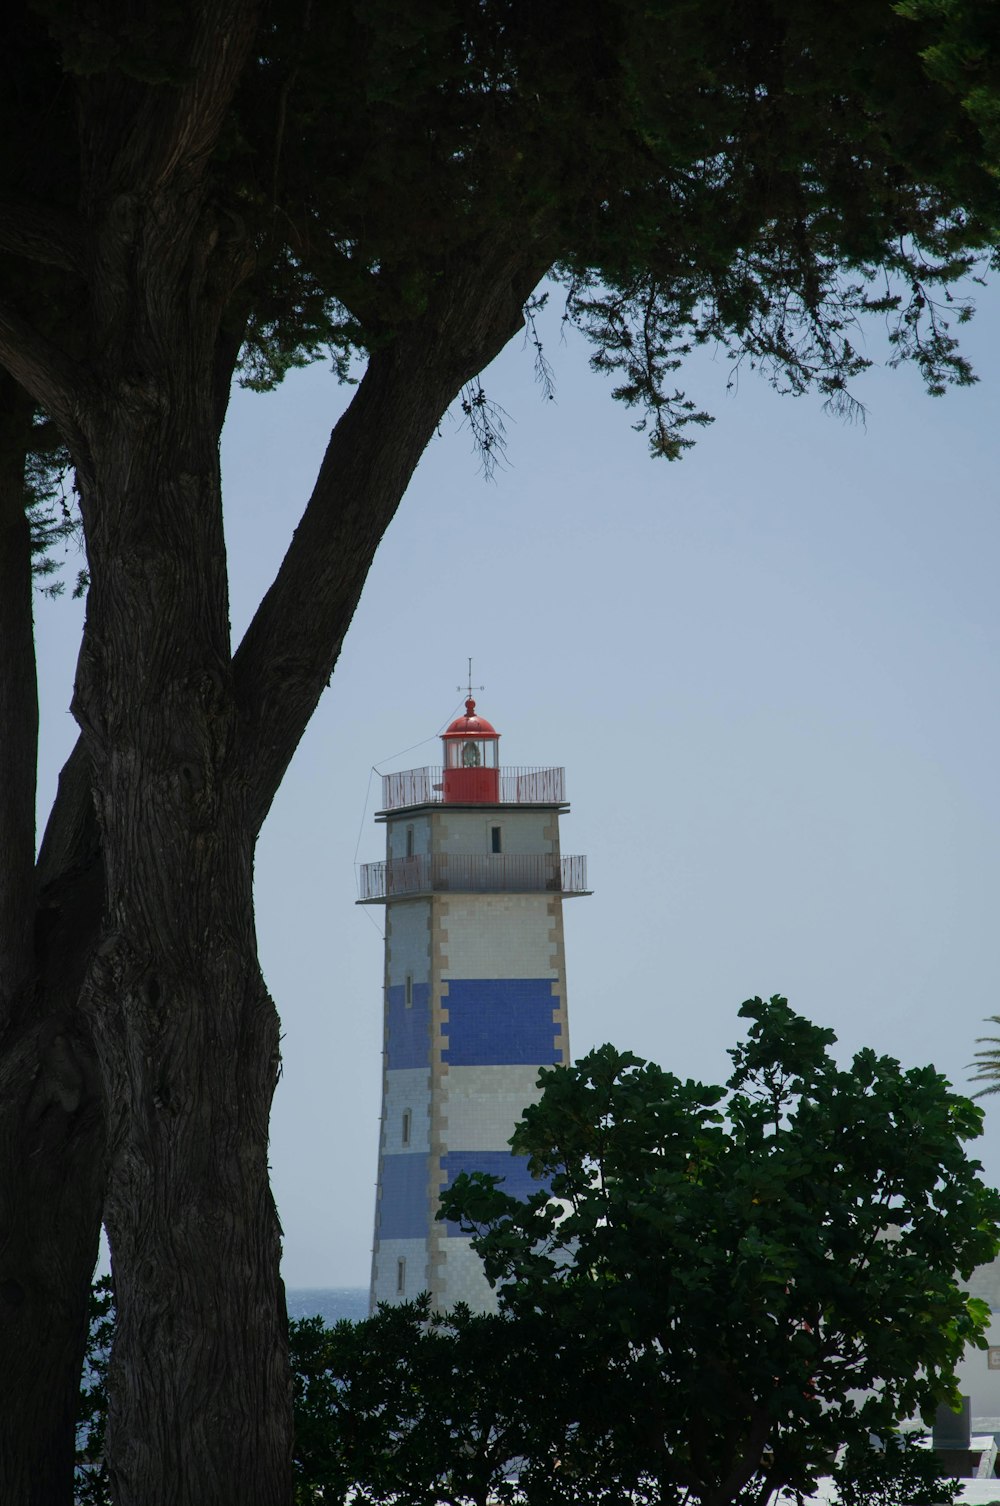 a tall light house sitting next to a tree